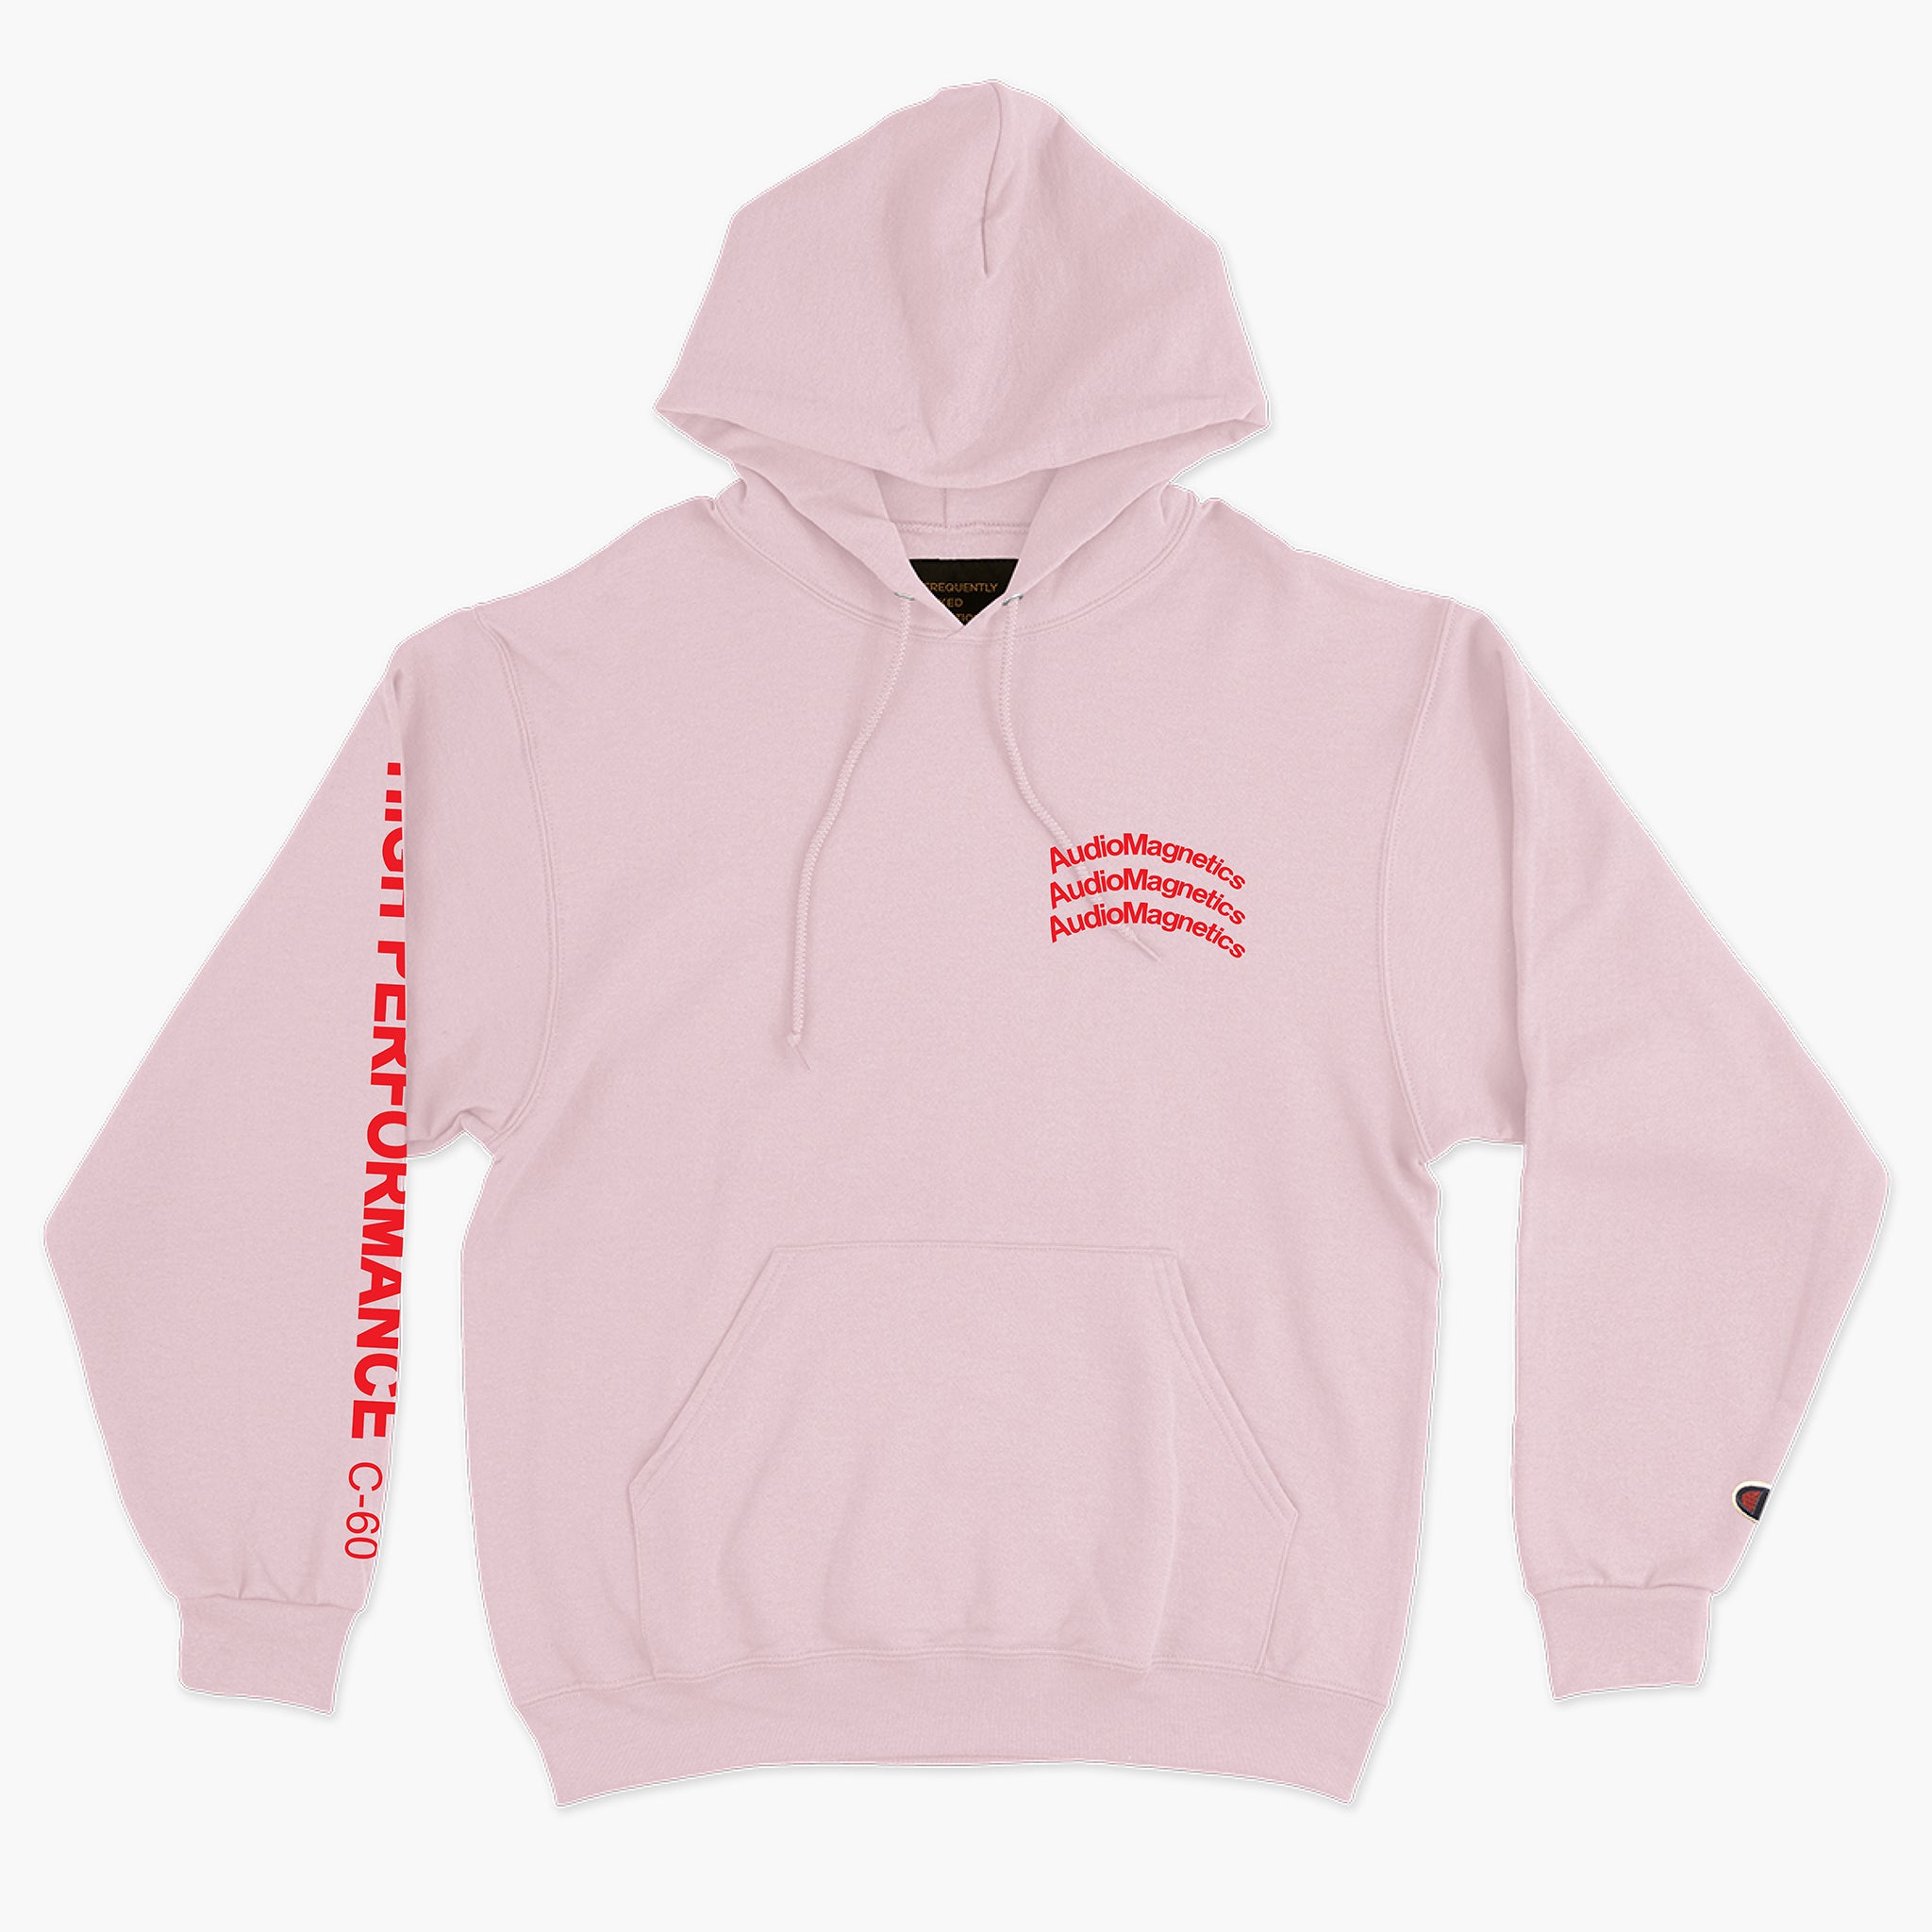 AudioMagnetics Hoodie - Frequently Asked Questions